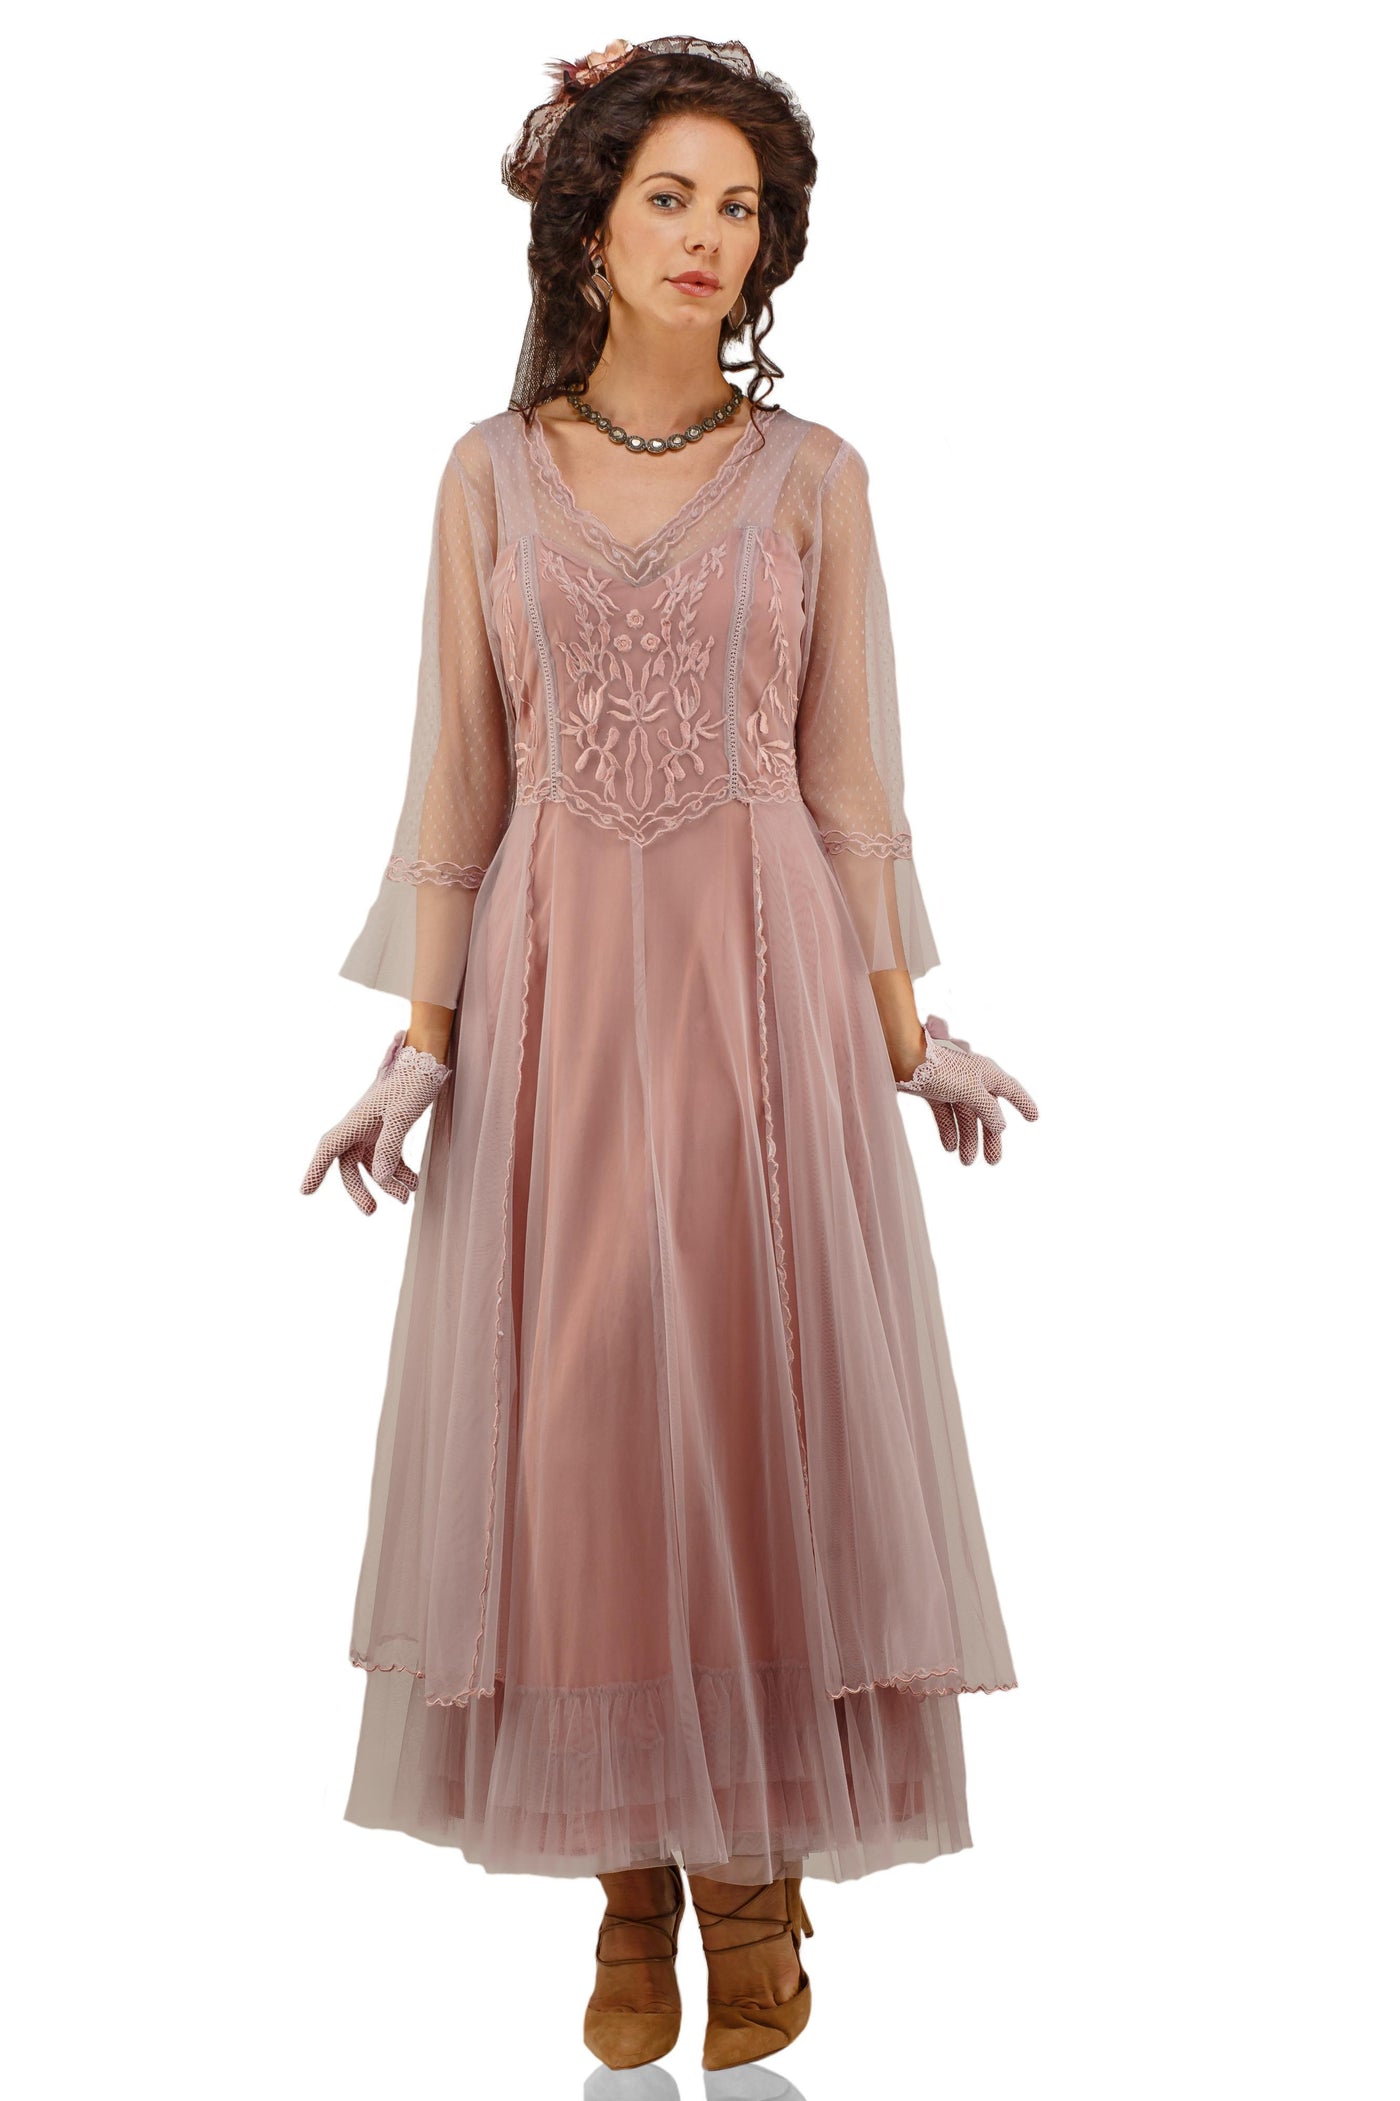 Vivian Vintage Style Wedding Gown in Mauve by Nataya - SALE